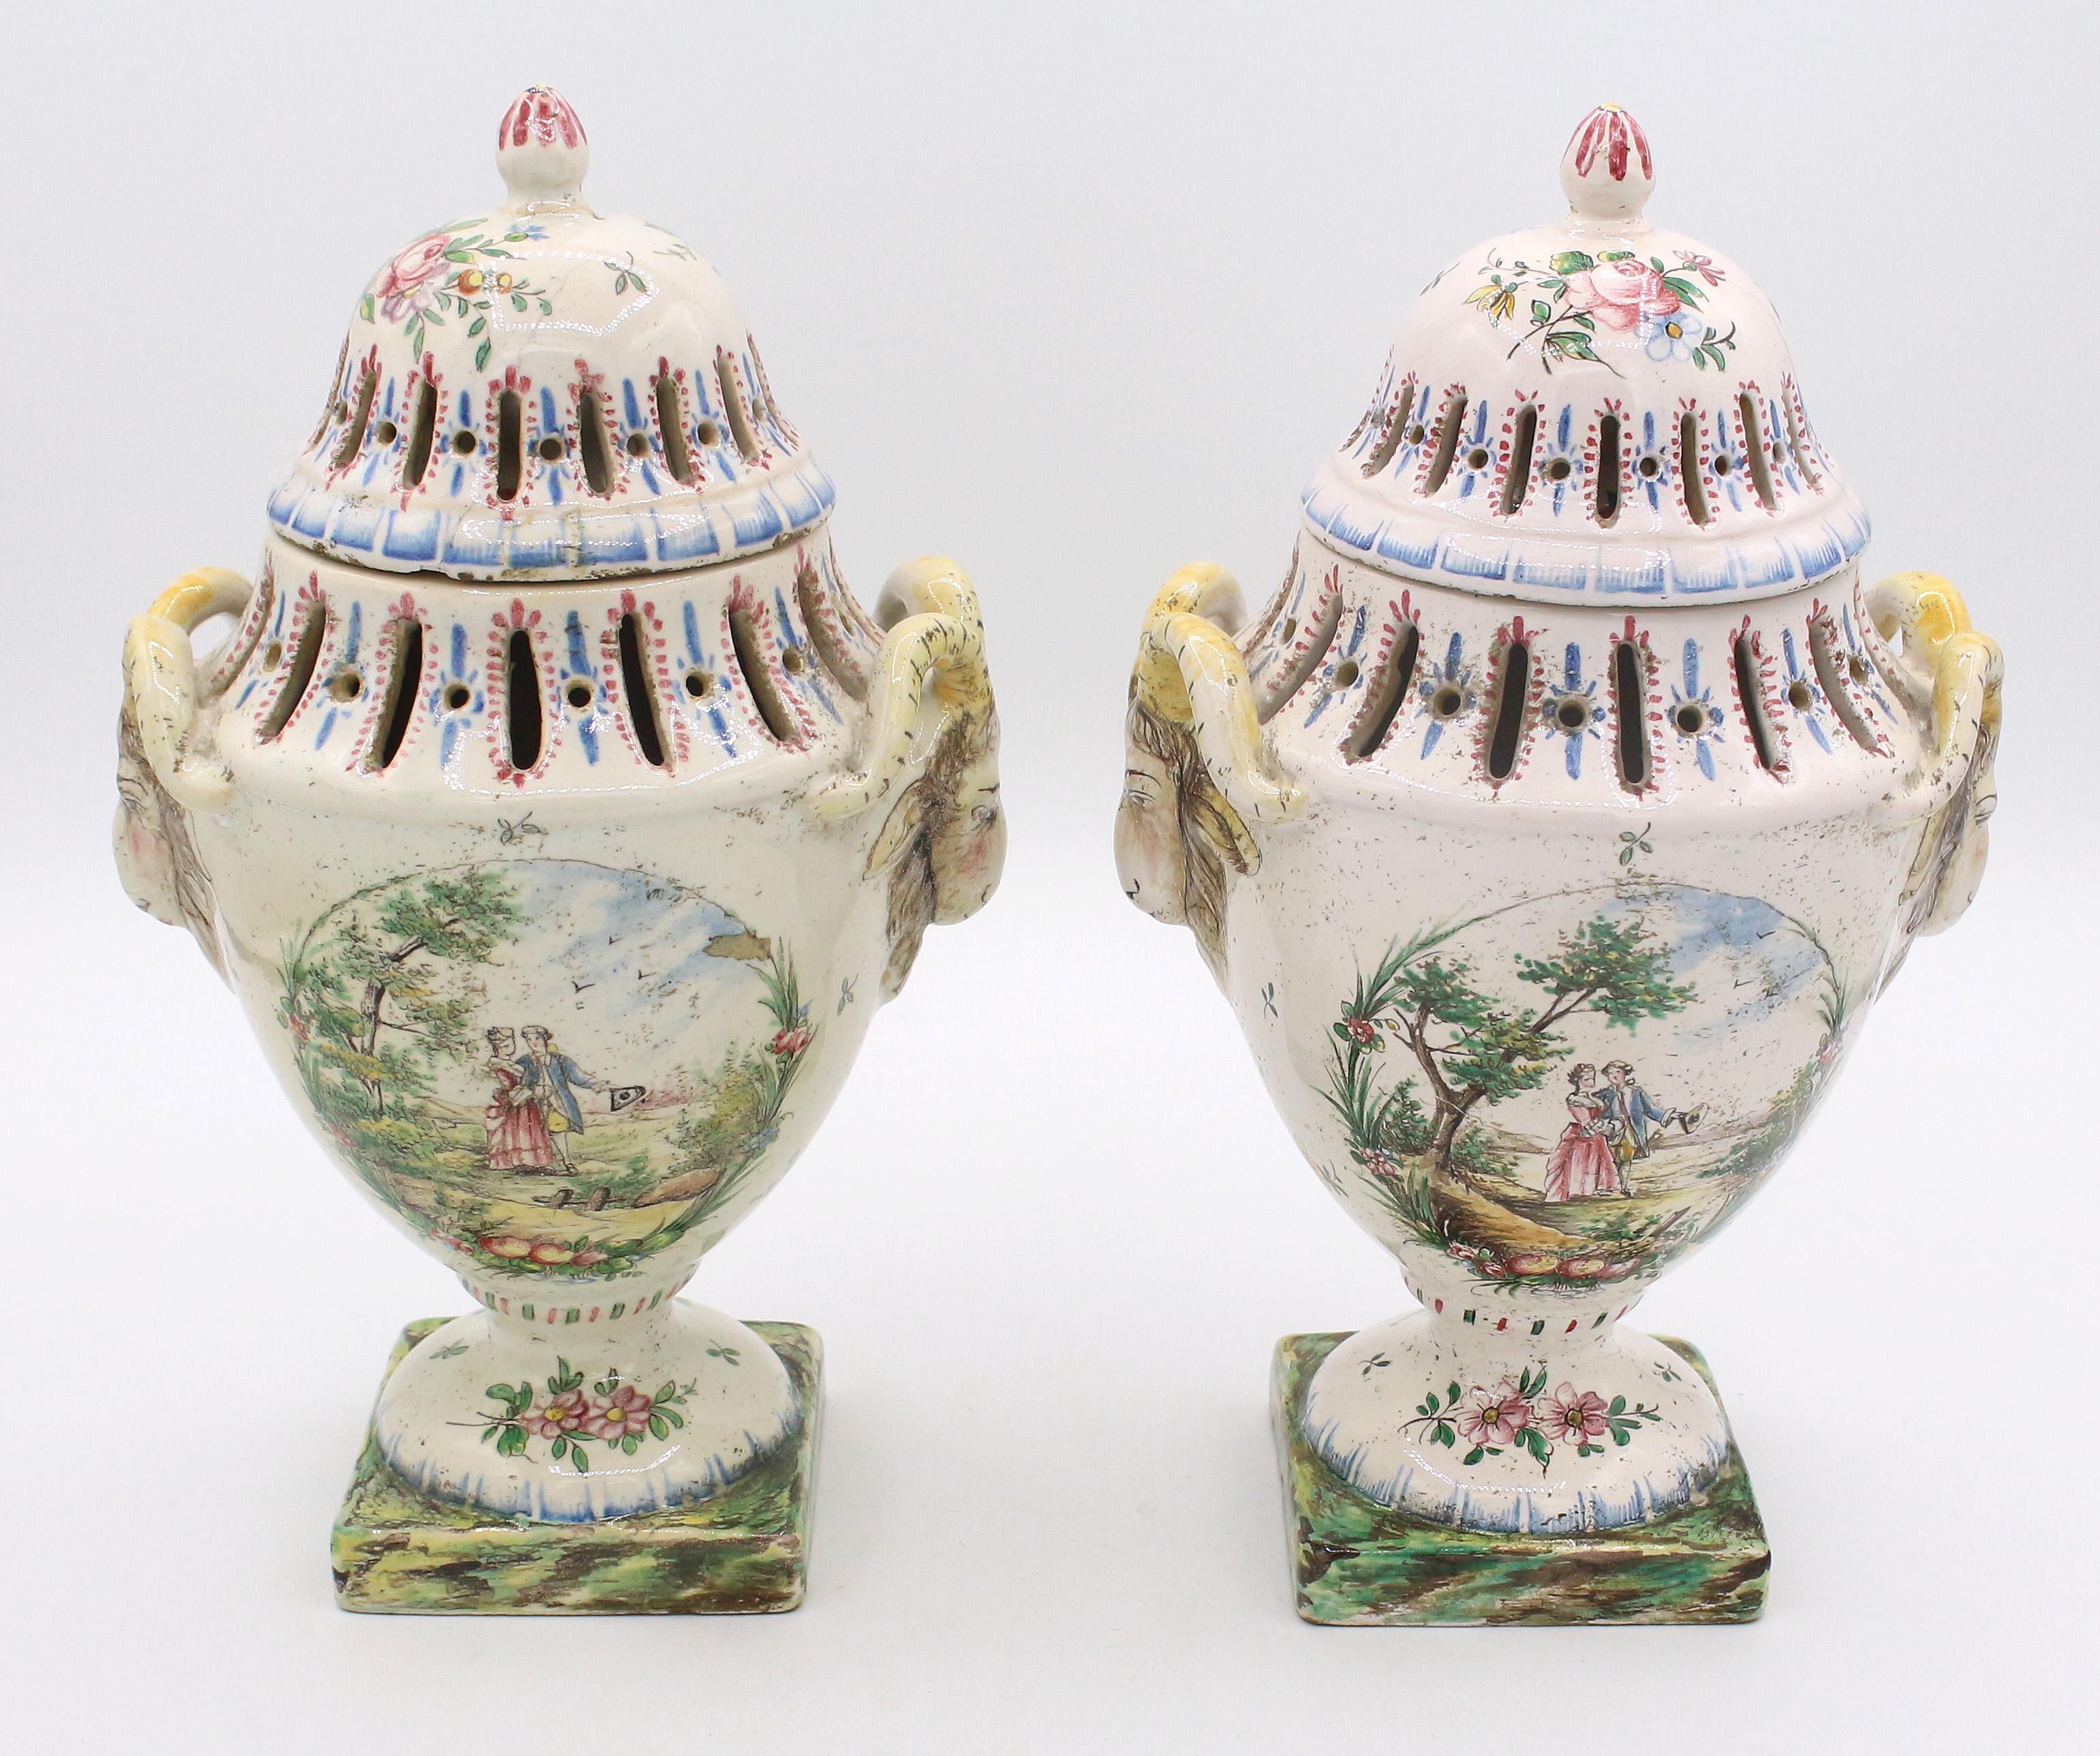 Neoclassical Pair of 18th Century French Potpourri Urns